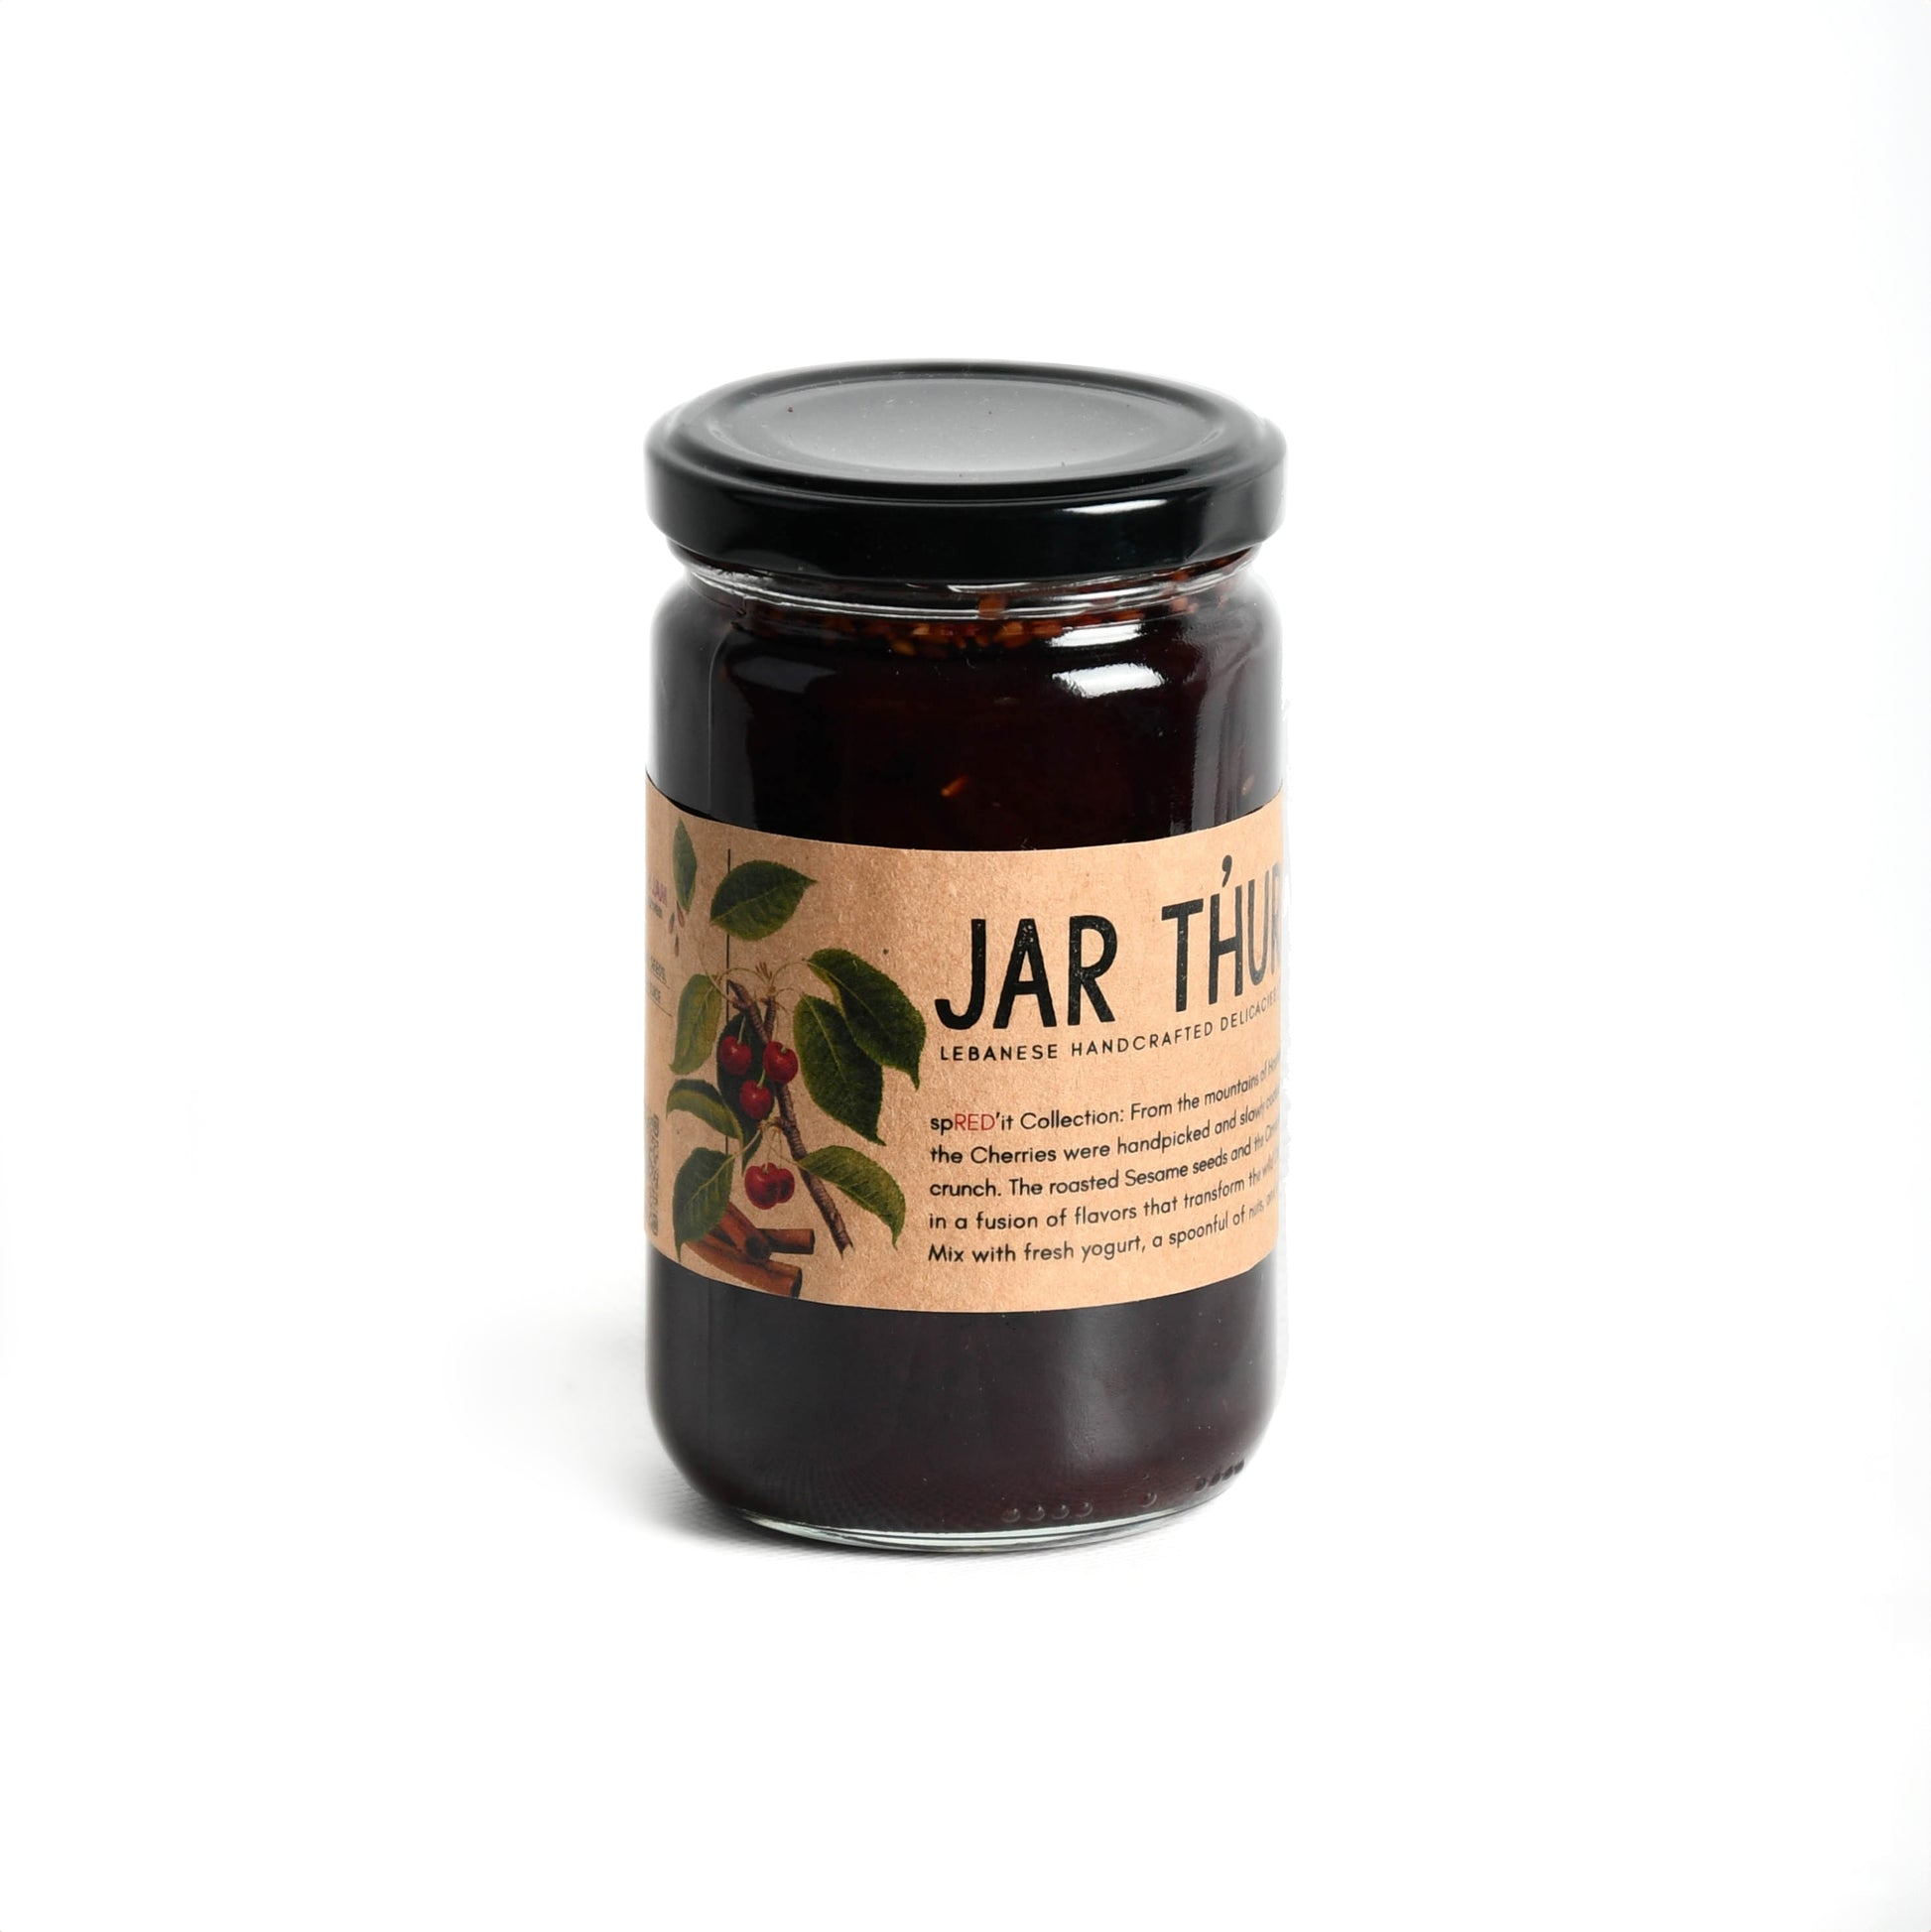 An elegant glass jar filled with a delightful blend of cherries, cinnamon, and sesame. The deep red cherries are interspersed with aromatic cinnamon sticks, and a sprinkling of sesame seeds adds a touch of uniqueness to this flavorful combination."